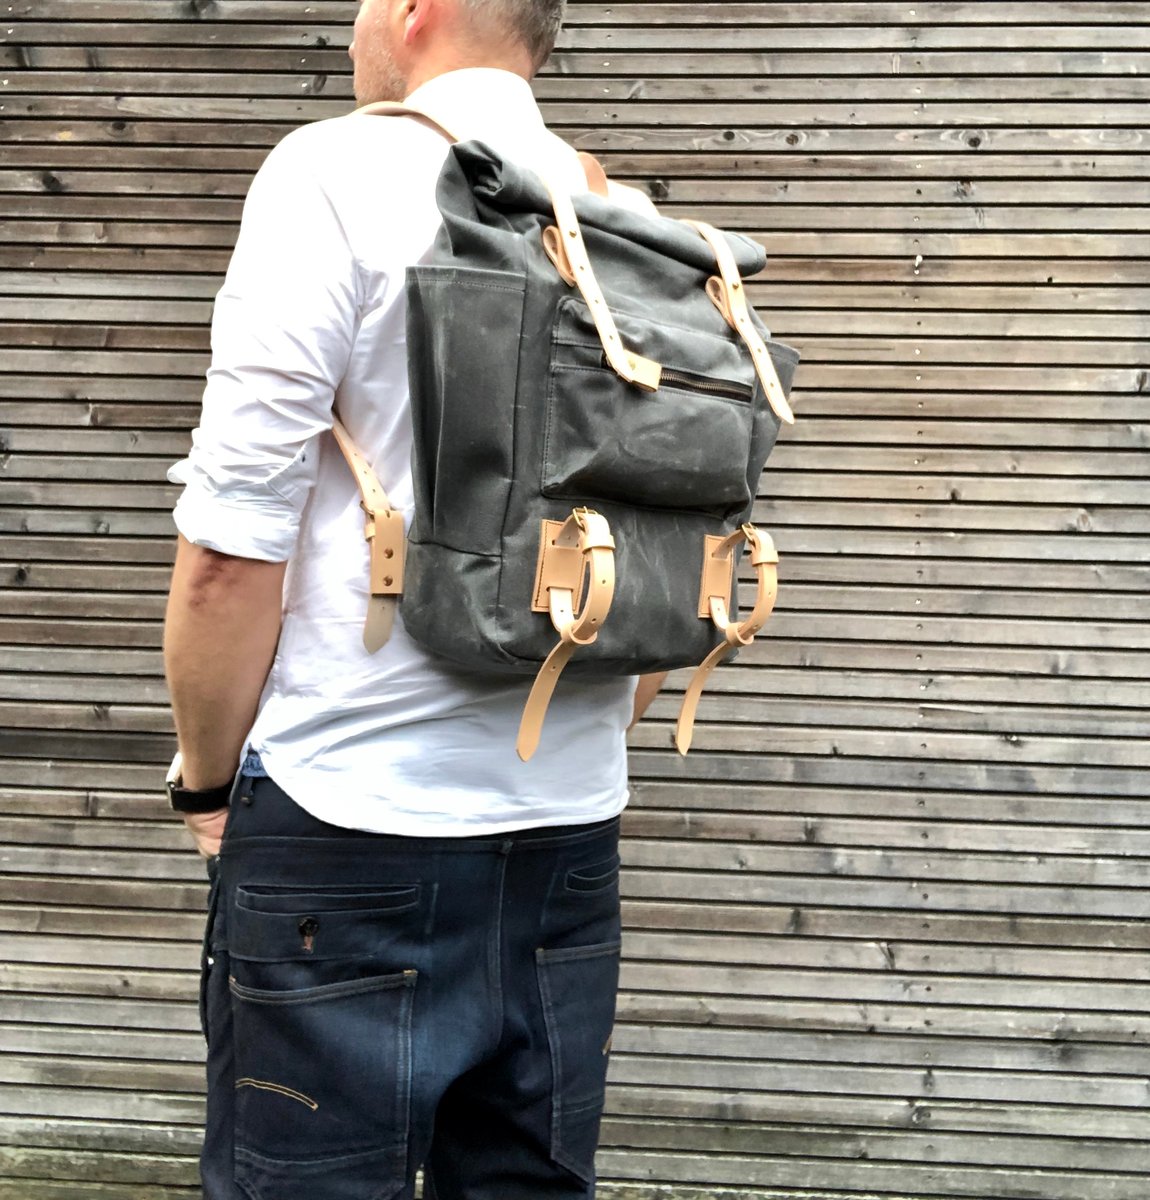 Yoga backpack in waxed canvas with zipper pocket and double yoga straps